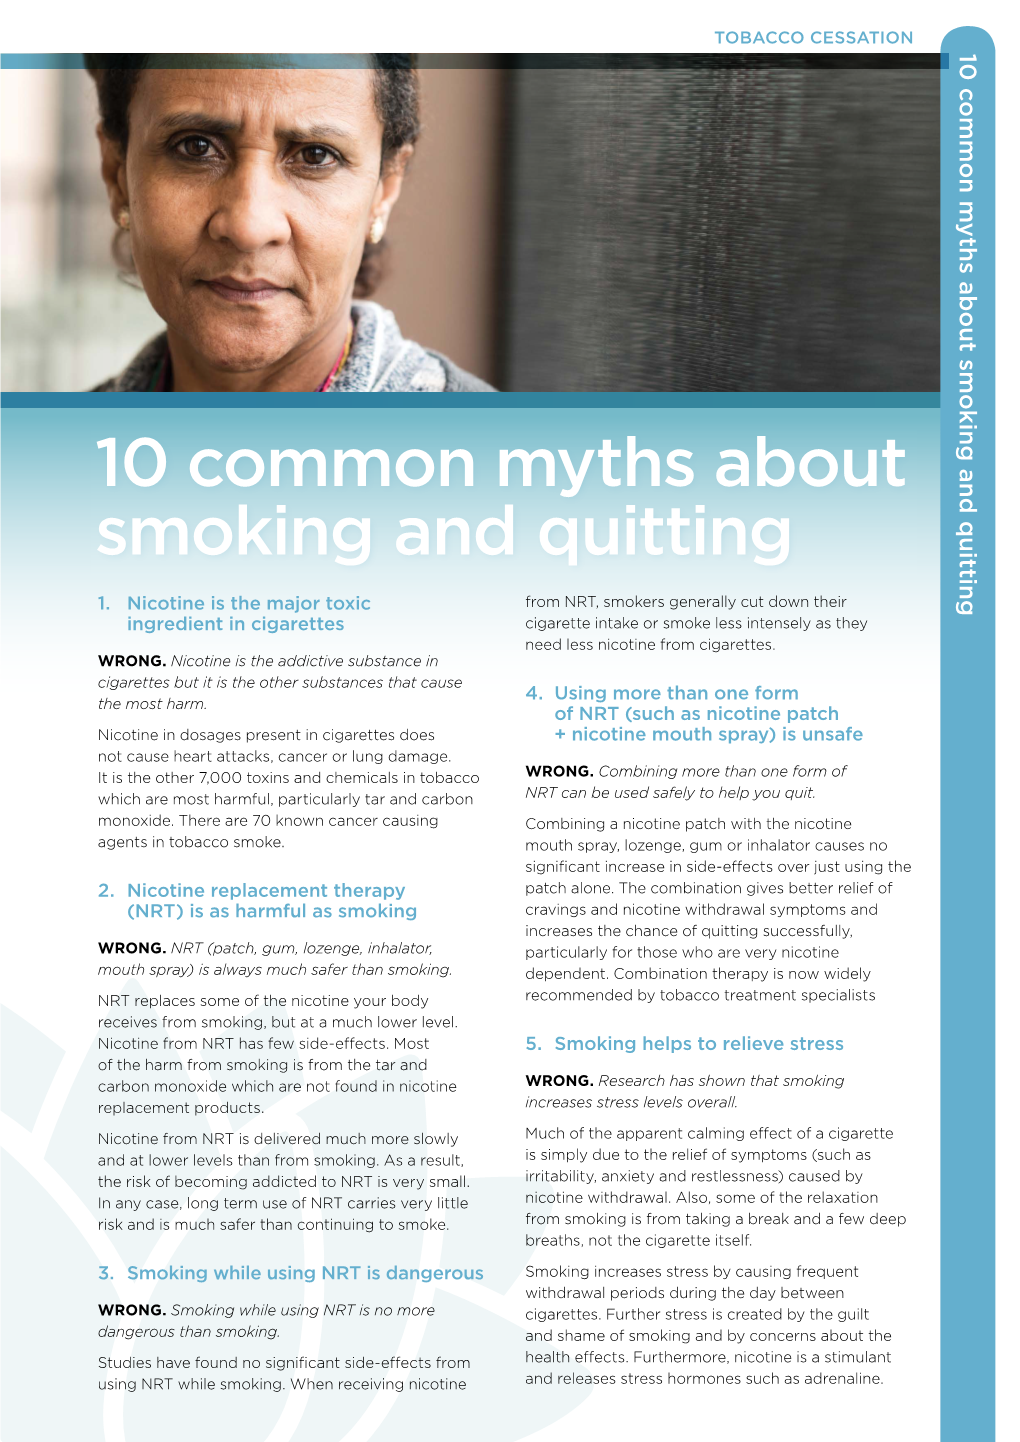 10 Common Myths About Smoking and Quitting